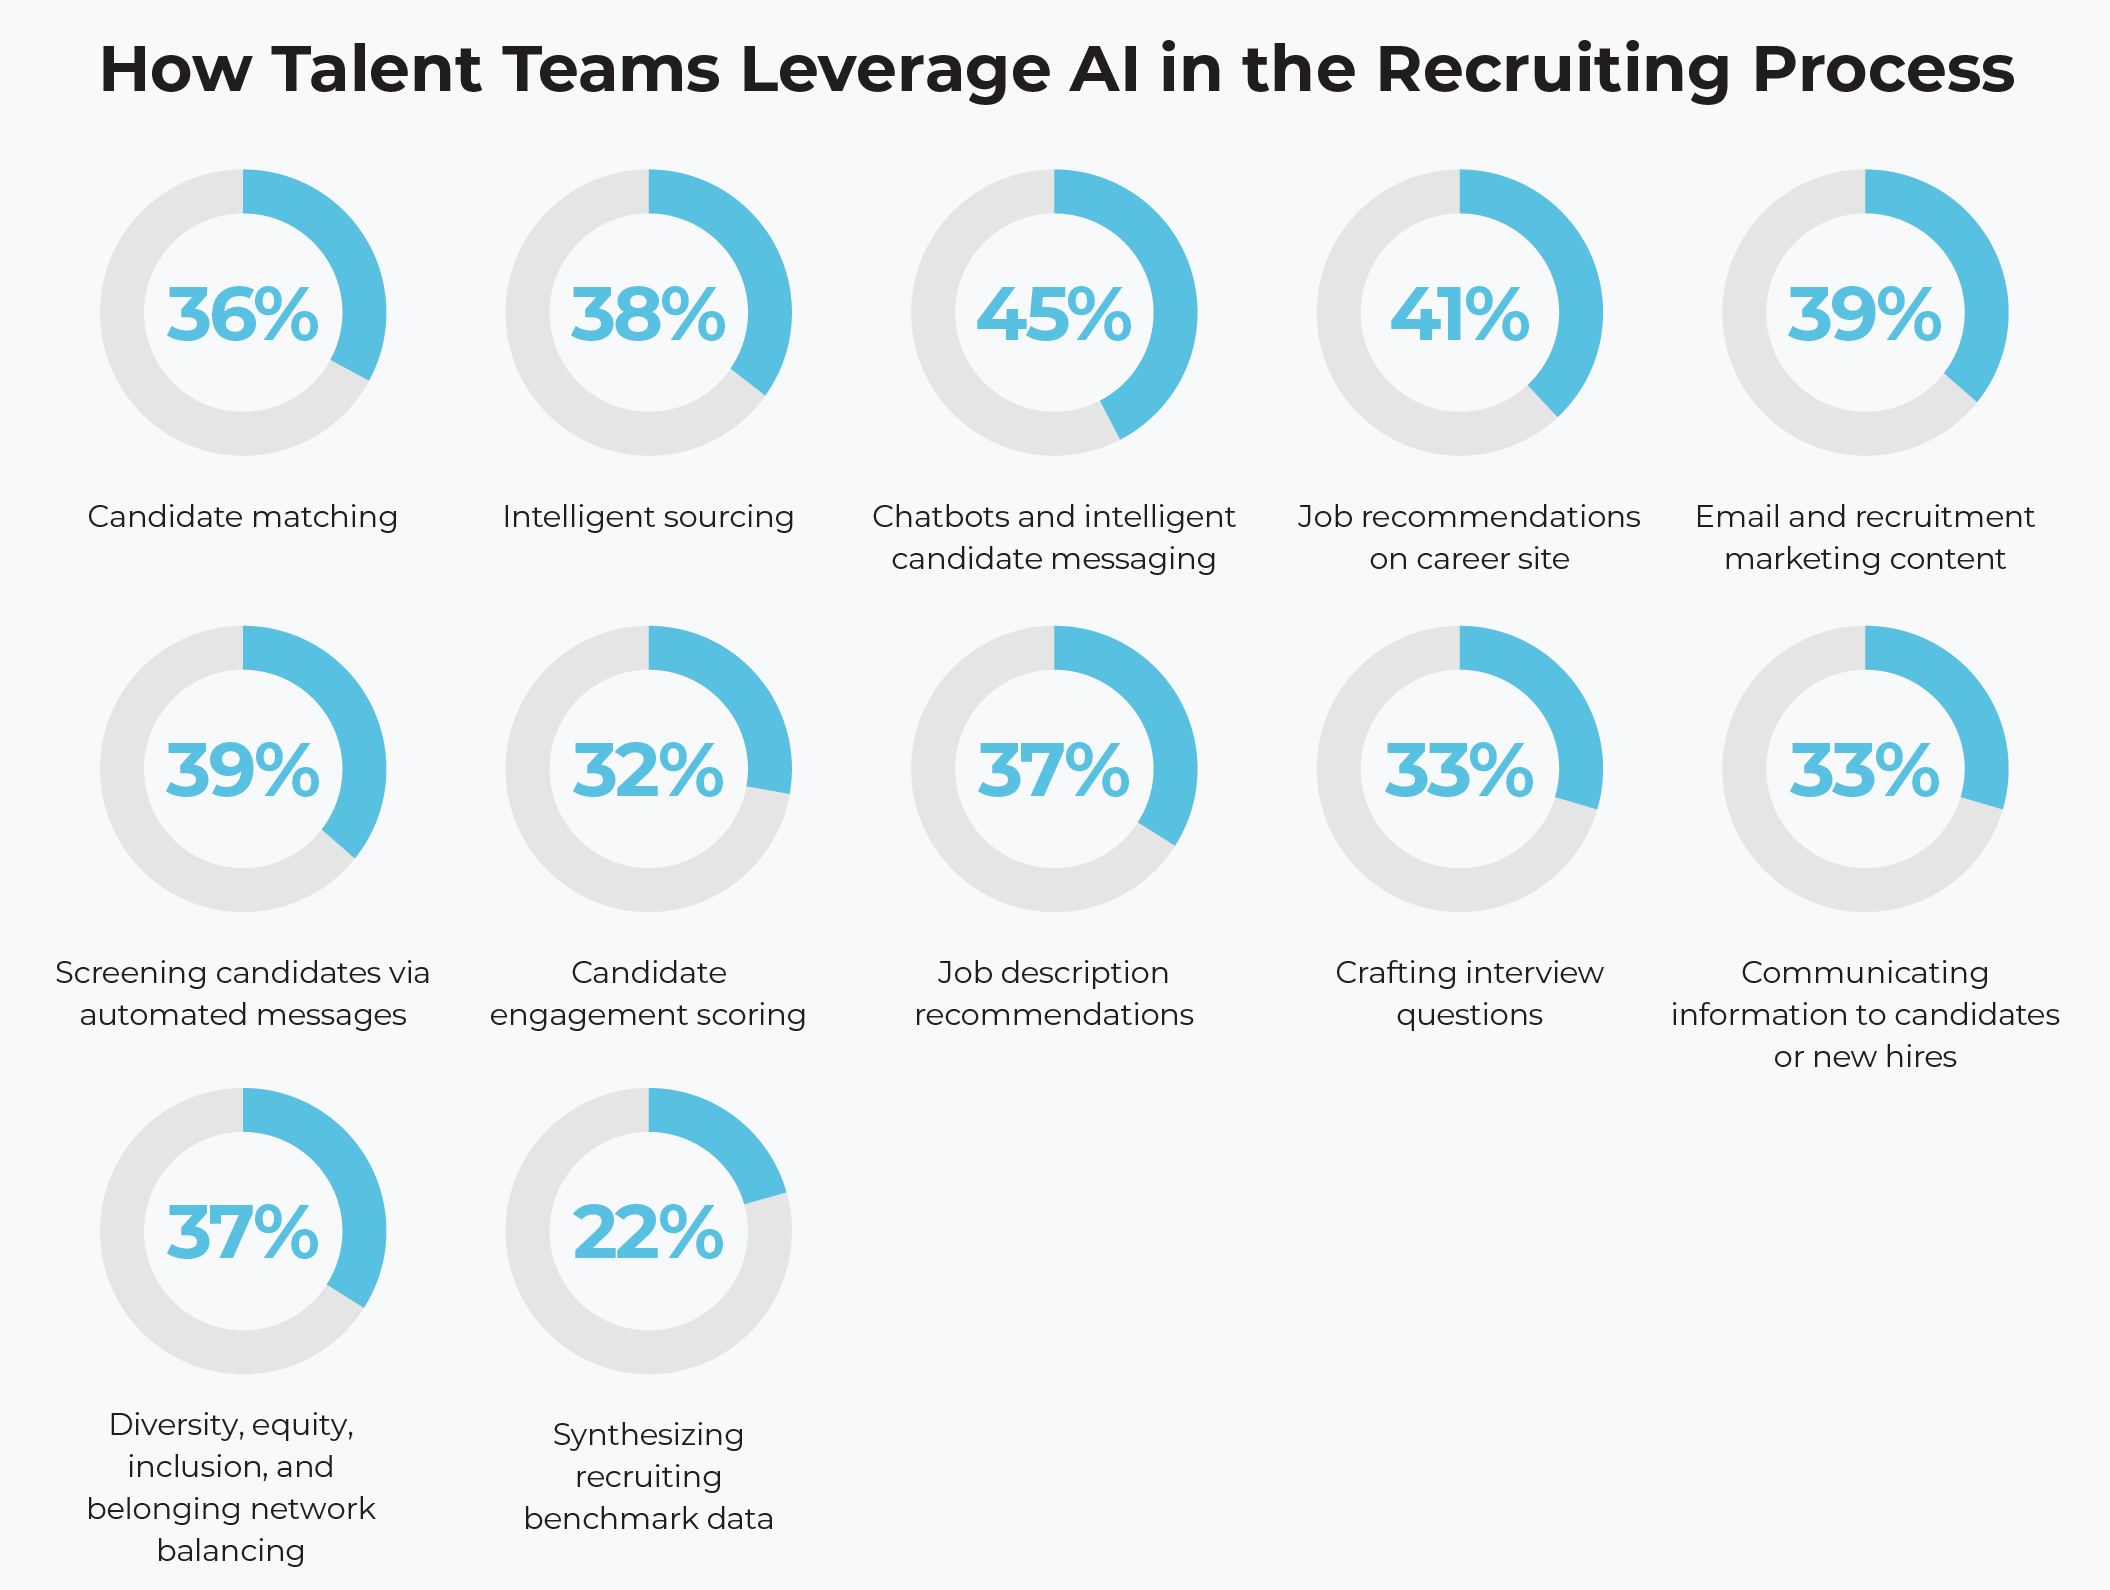 How Talent Teams Leverage AI in the Recruiting Process